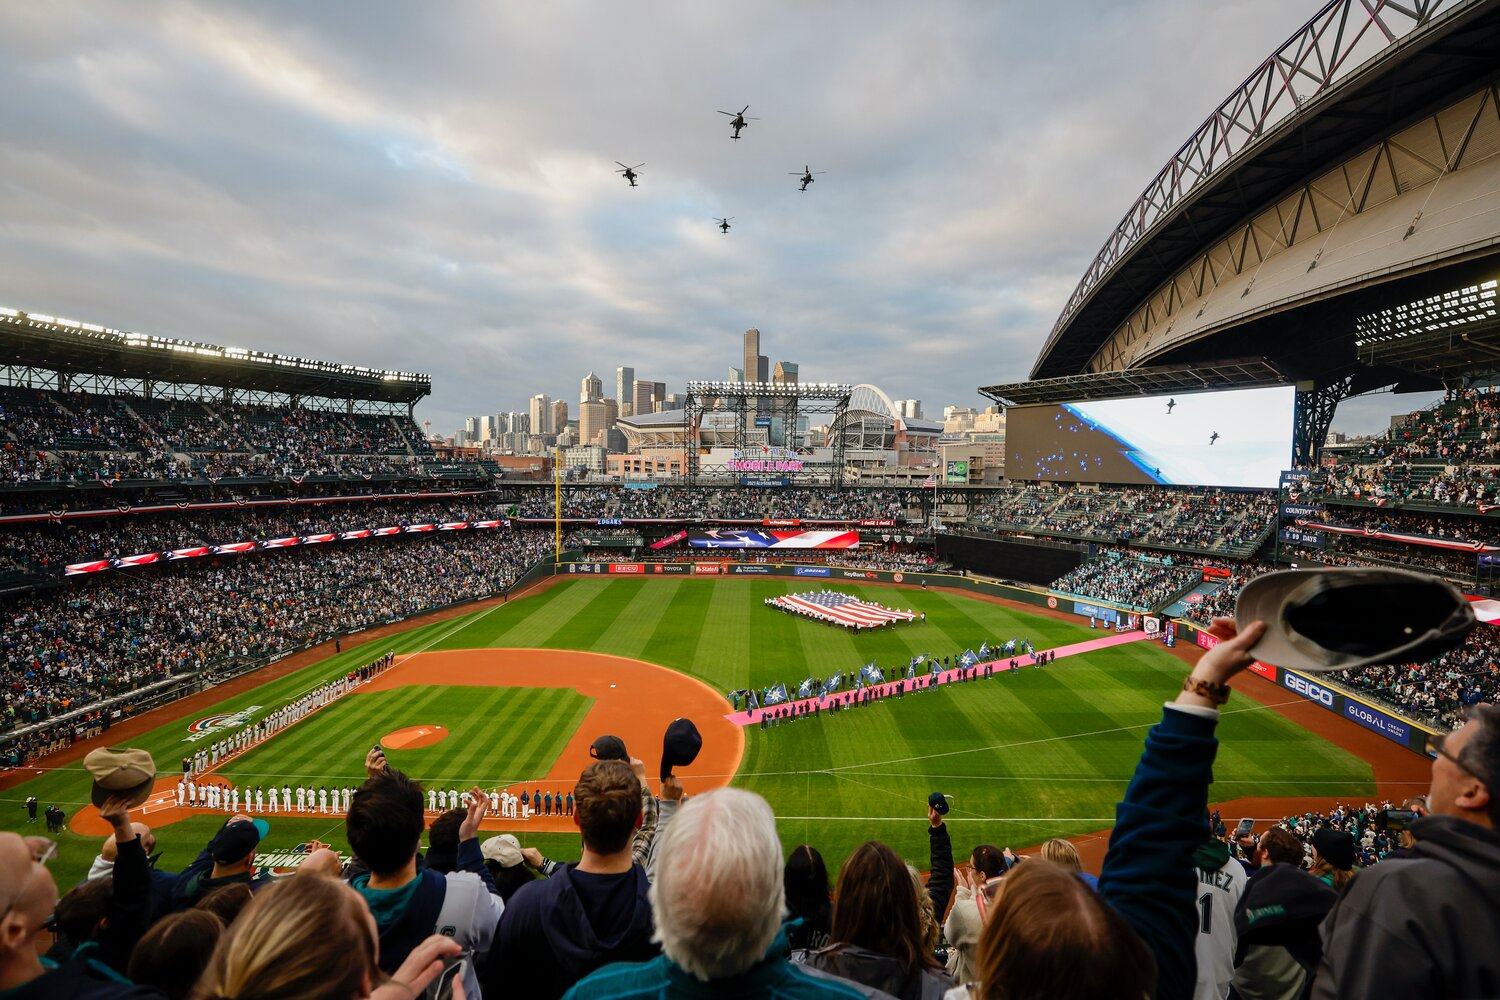 Mar 30, 2023; Seattle, Washington, USA; General view of T-Mobile Park during the national anthem before an Opening Day game between the Cleveland Guardians and Seattle Mariners. Mandatory Credit: Joe Nicholson-USA TODAY Sports